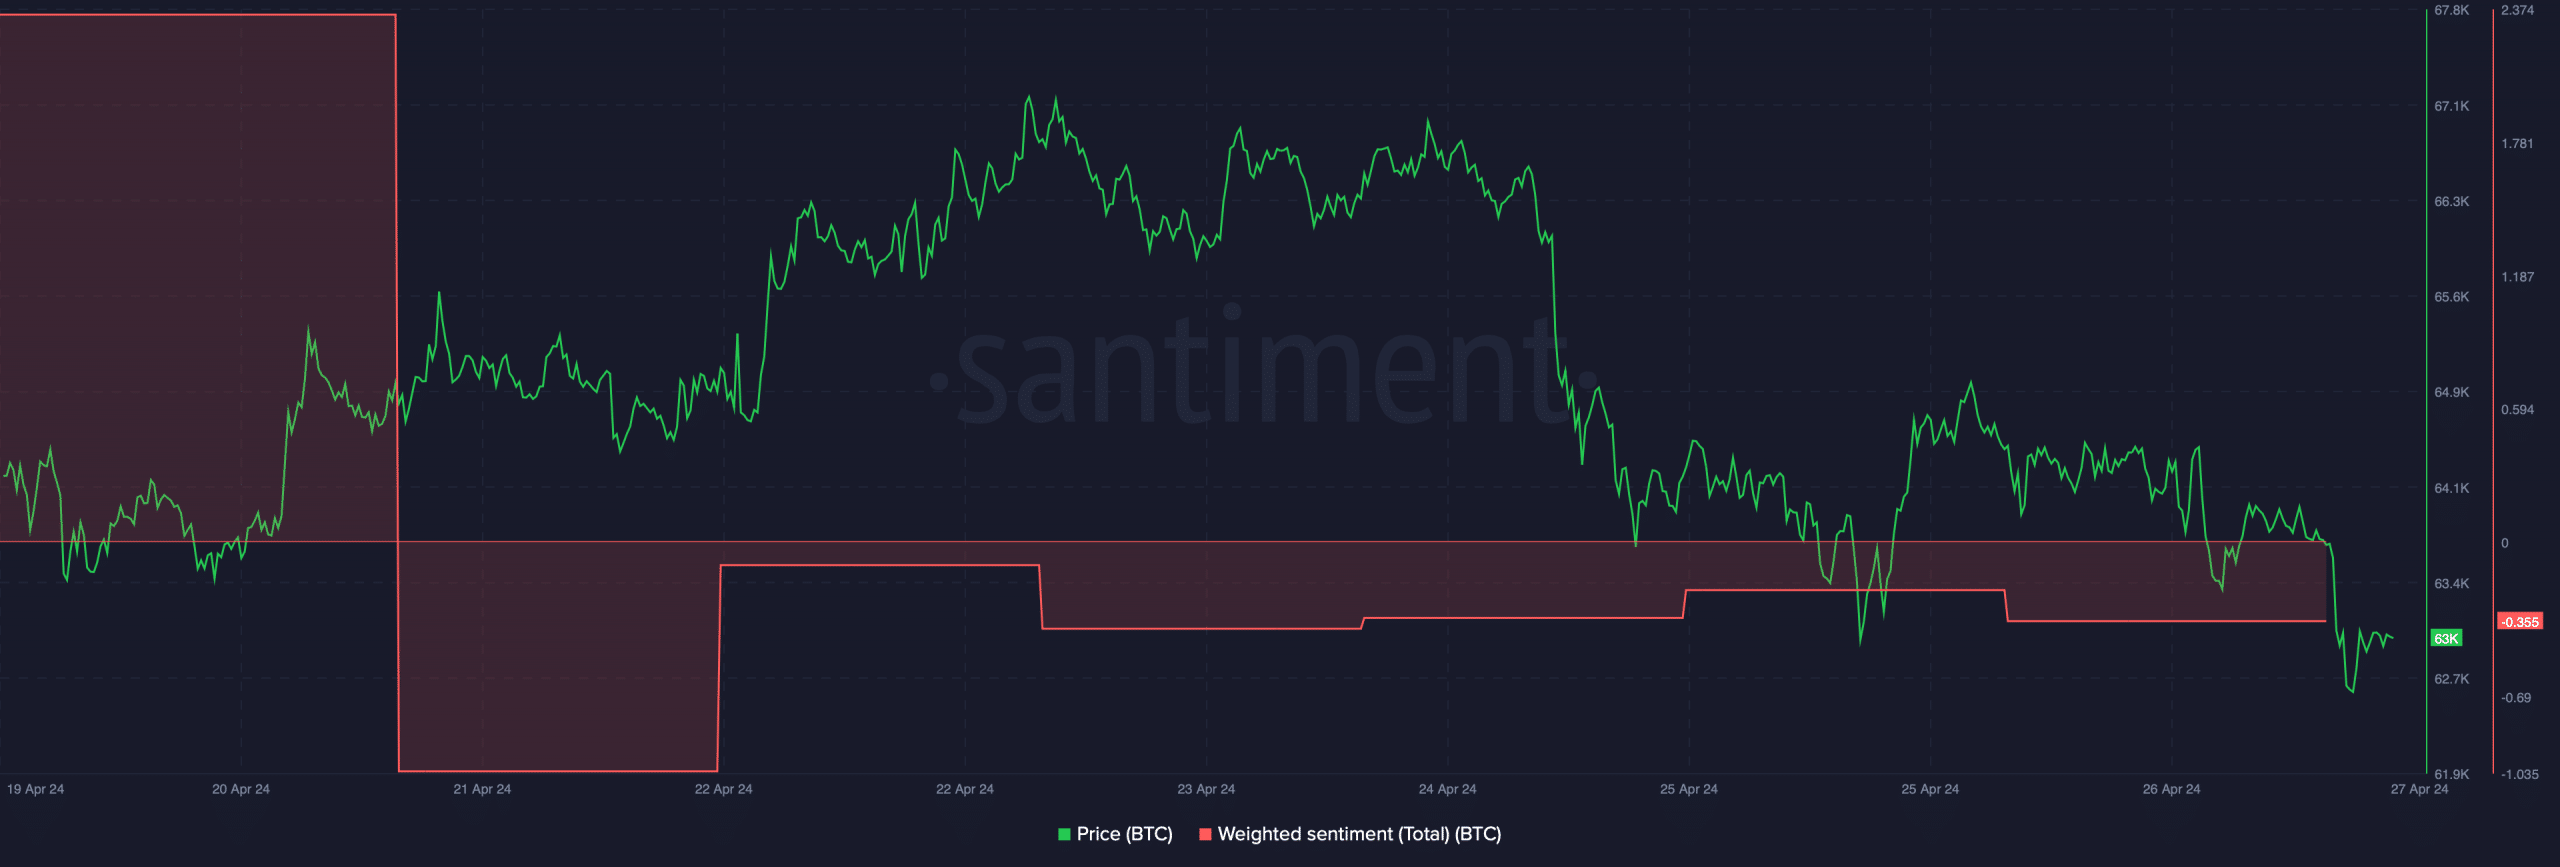 Bitcoin's weighted sentiment fell